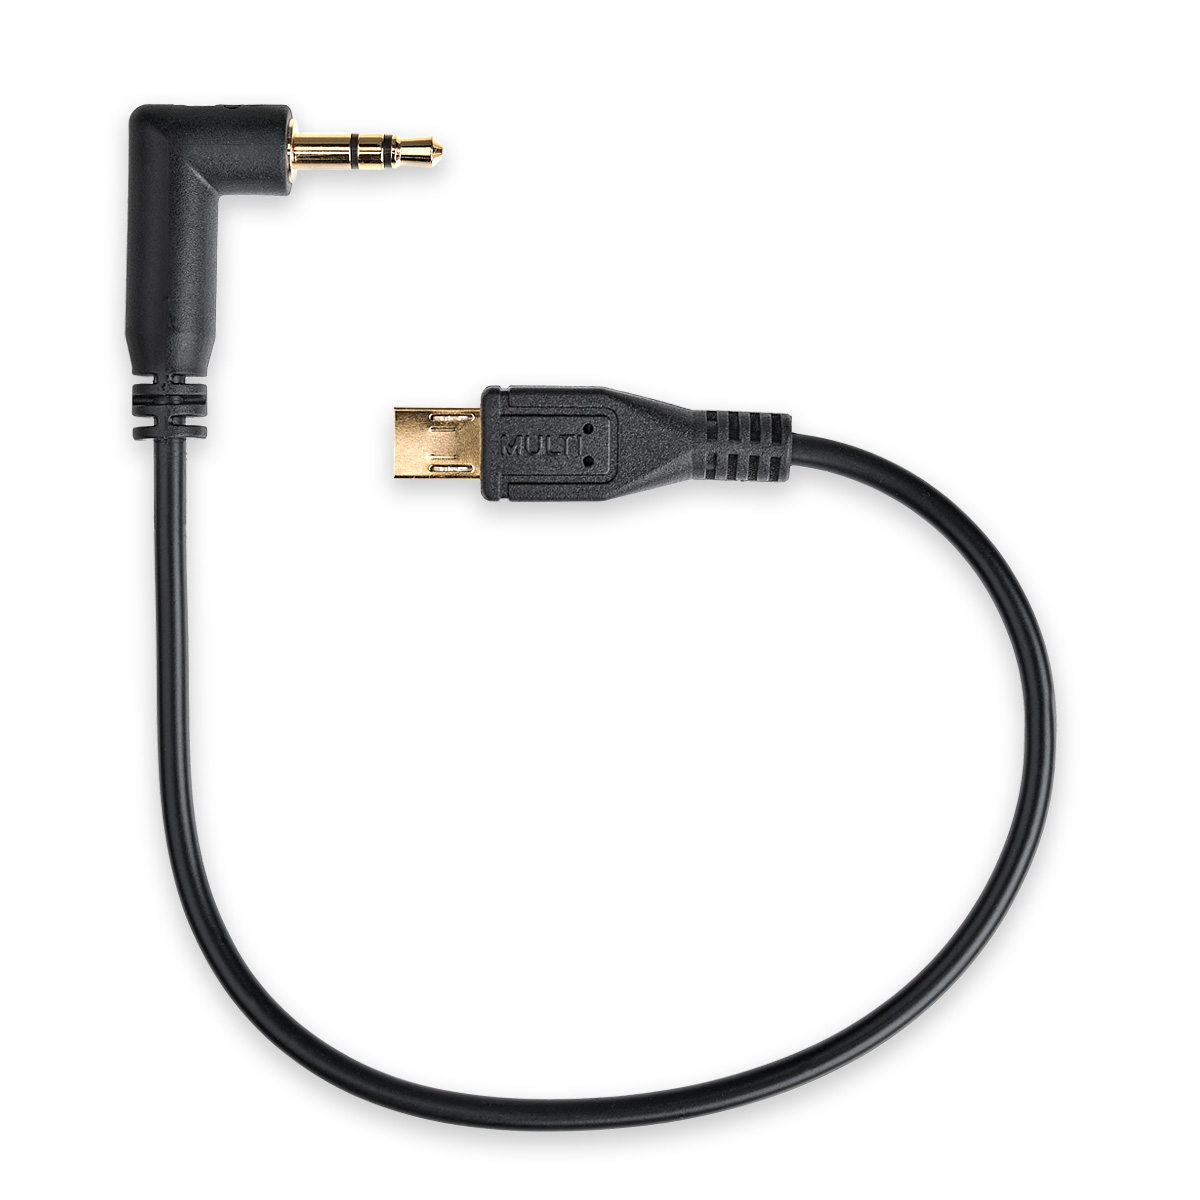 Ready-to-Ship Straight USB Cables